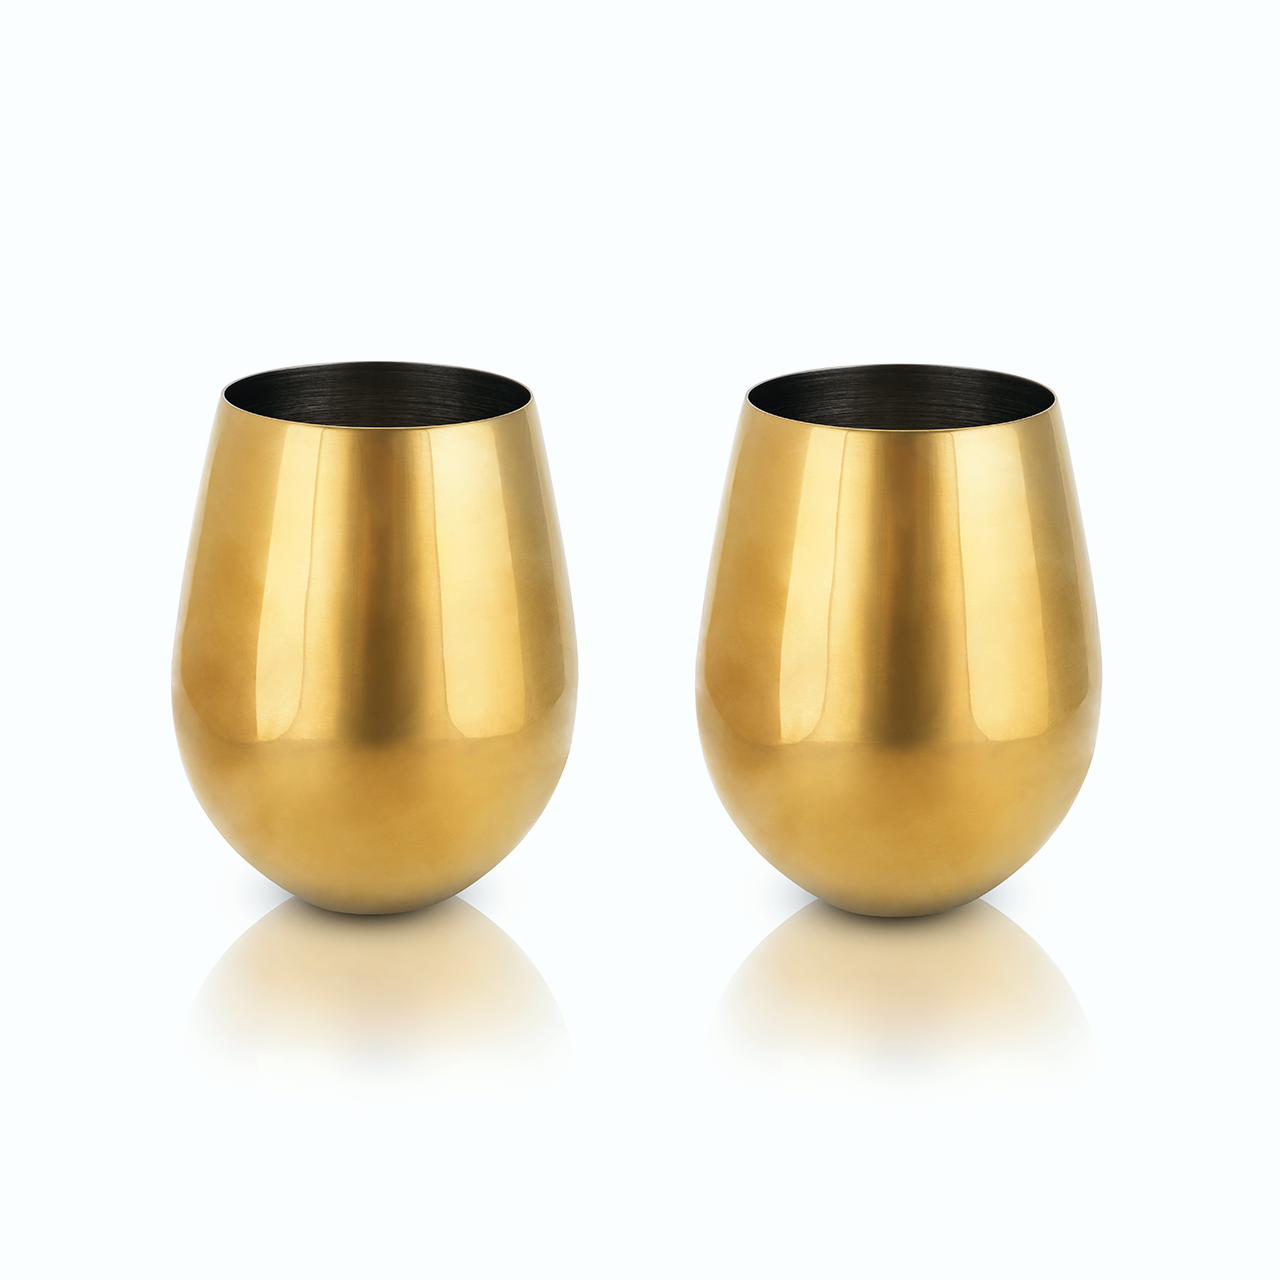 https://cdn10.bigcommerce.com/s-9dzfgkp0th/products/1590/images/1963/Viski-Belmont-Gold-Stemless-Wine-Glasses-James-Anthony-Collection__09949.1501602655.1280.1280.png?c=2